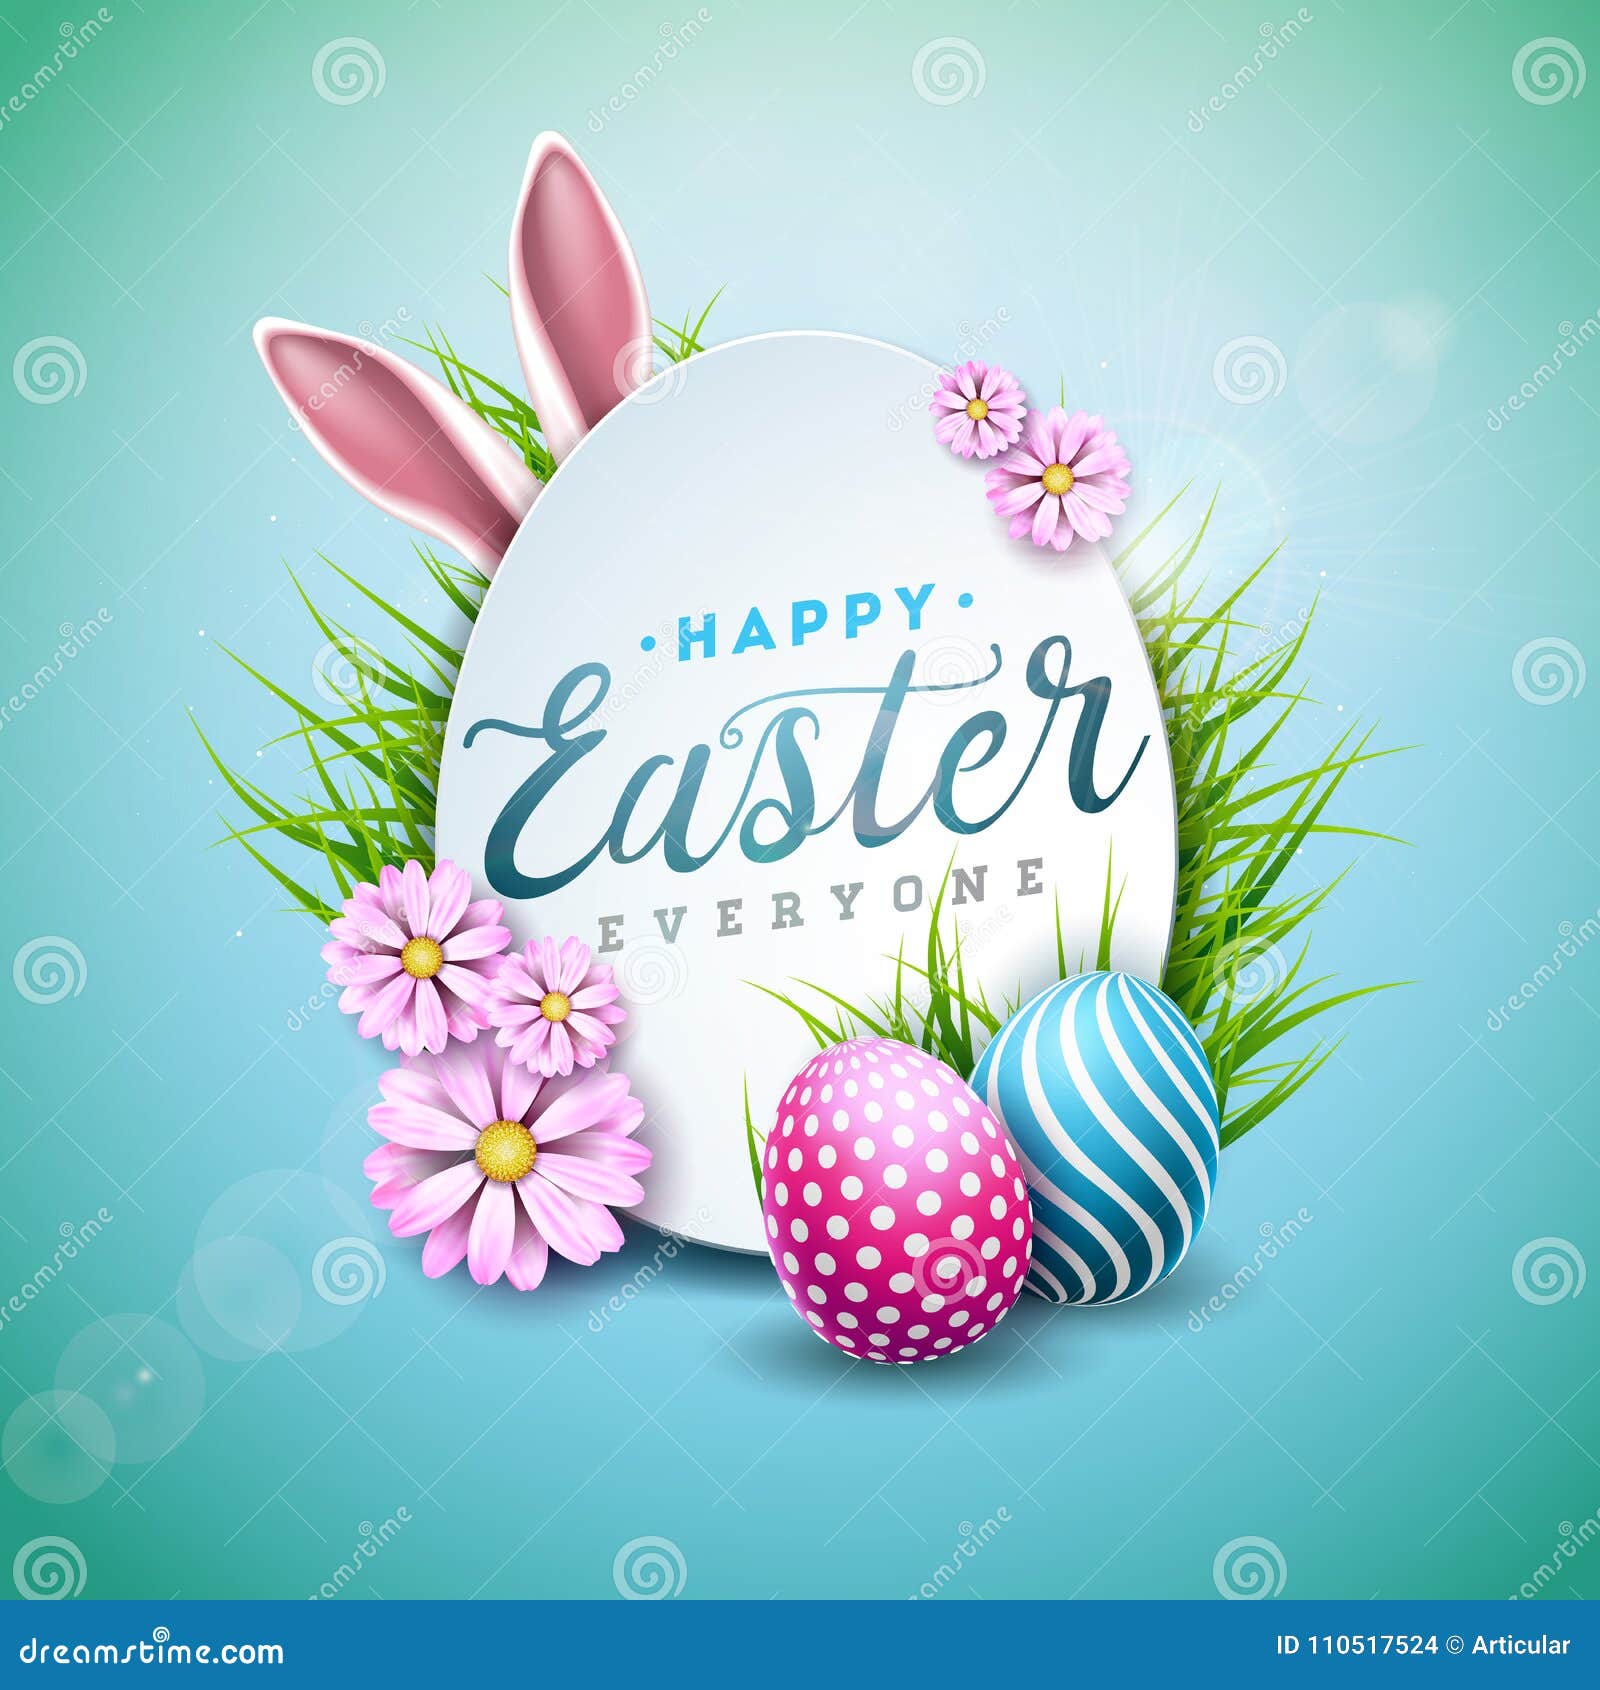 Vector Illustration of Happy Easter Holiday with Painted Egg ...